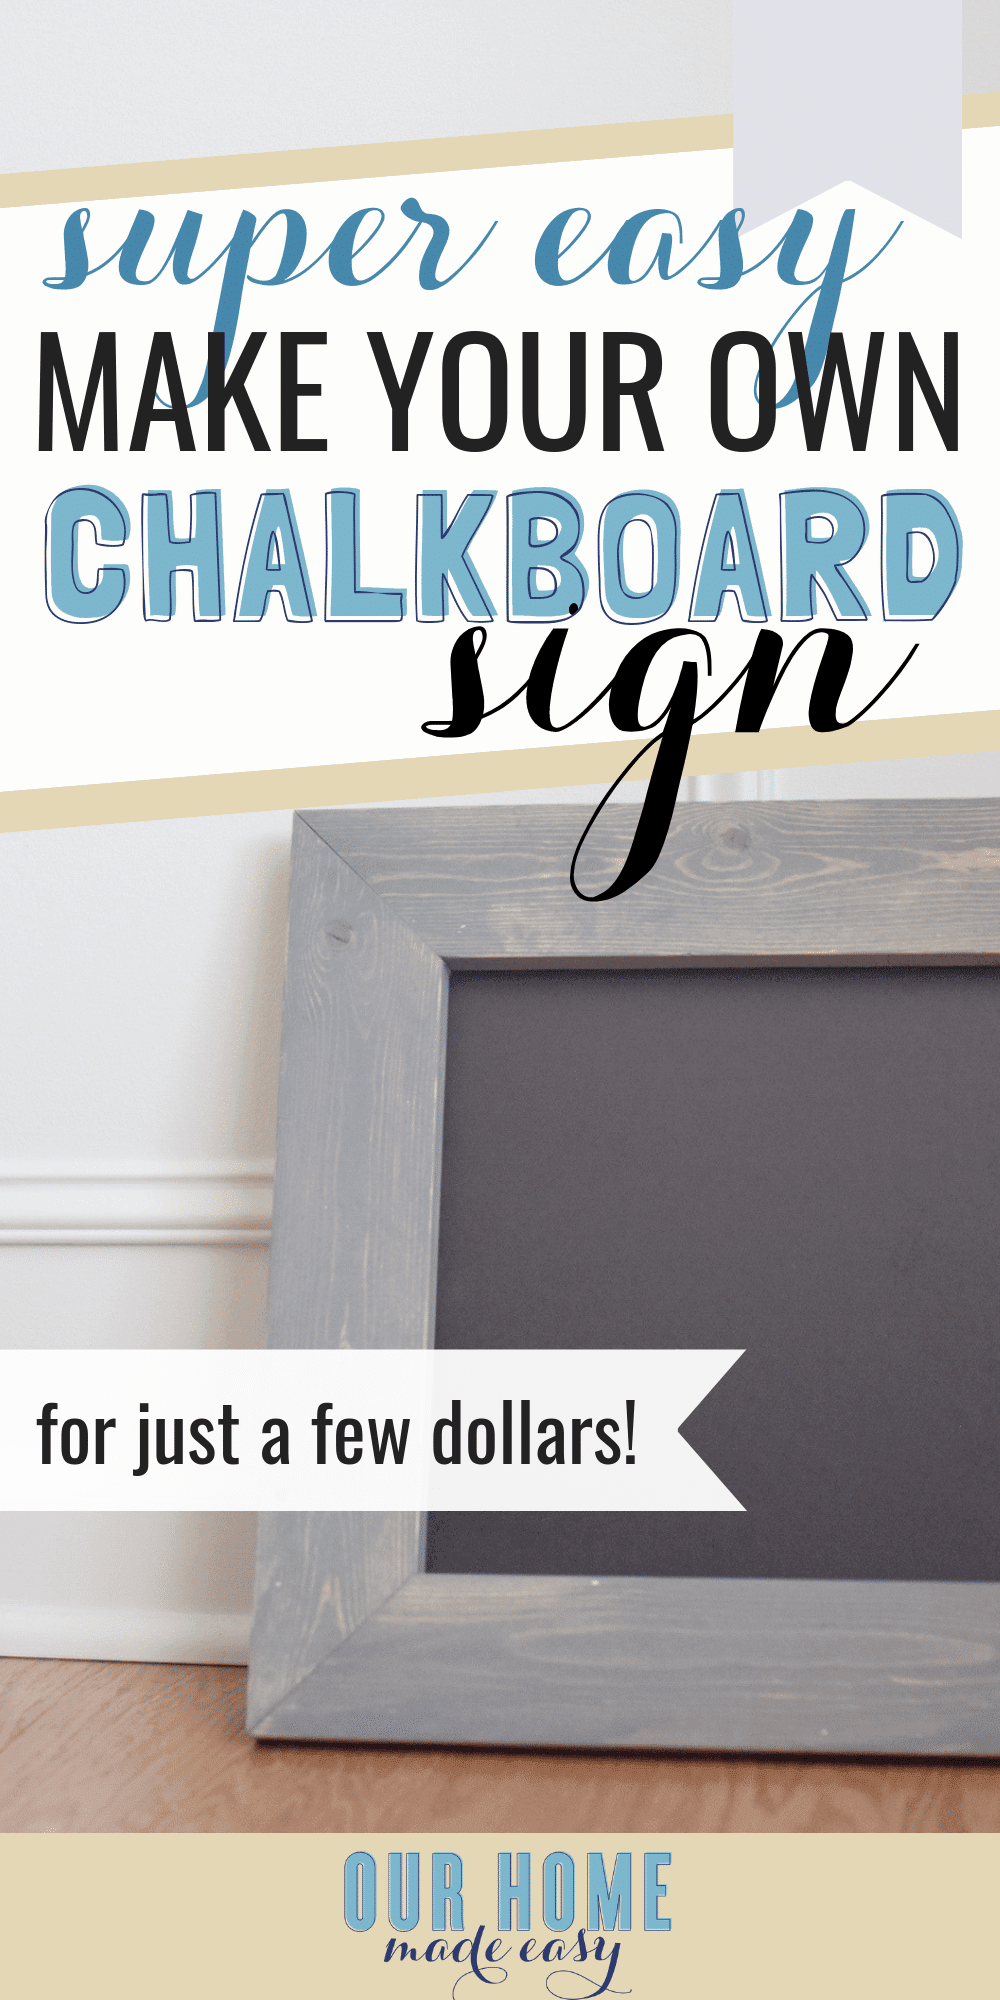 Make this easy DIY Chalkboard sign for less than $10! Customize the size and stain to coordinate with your home's decor. Click for step by step directions! #chalkboard #farmhouse #signs #chalk